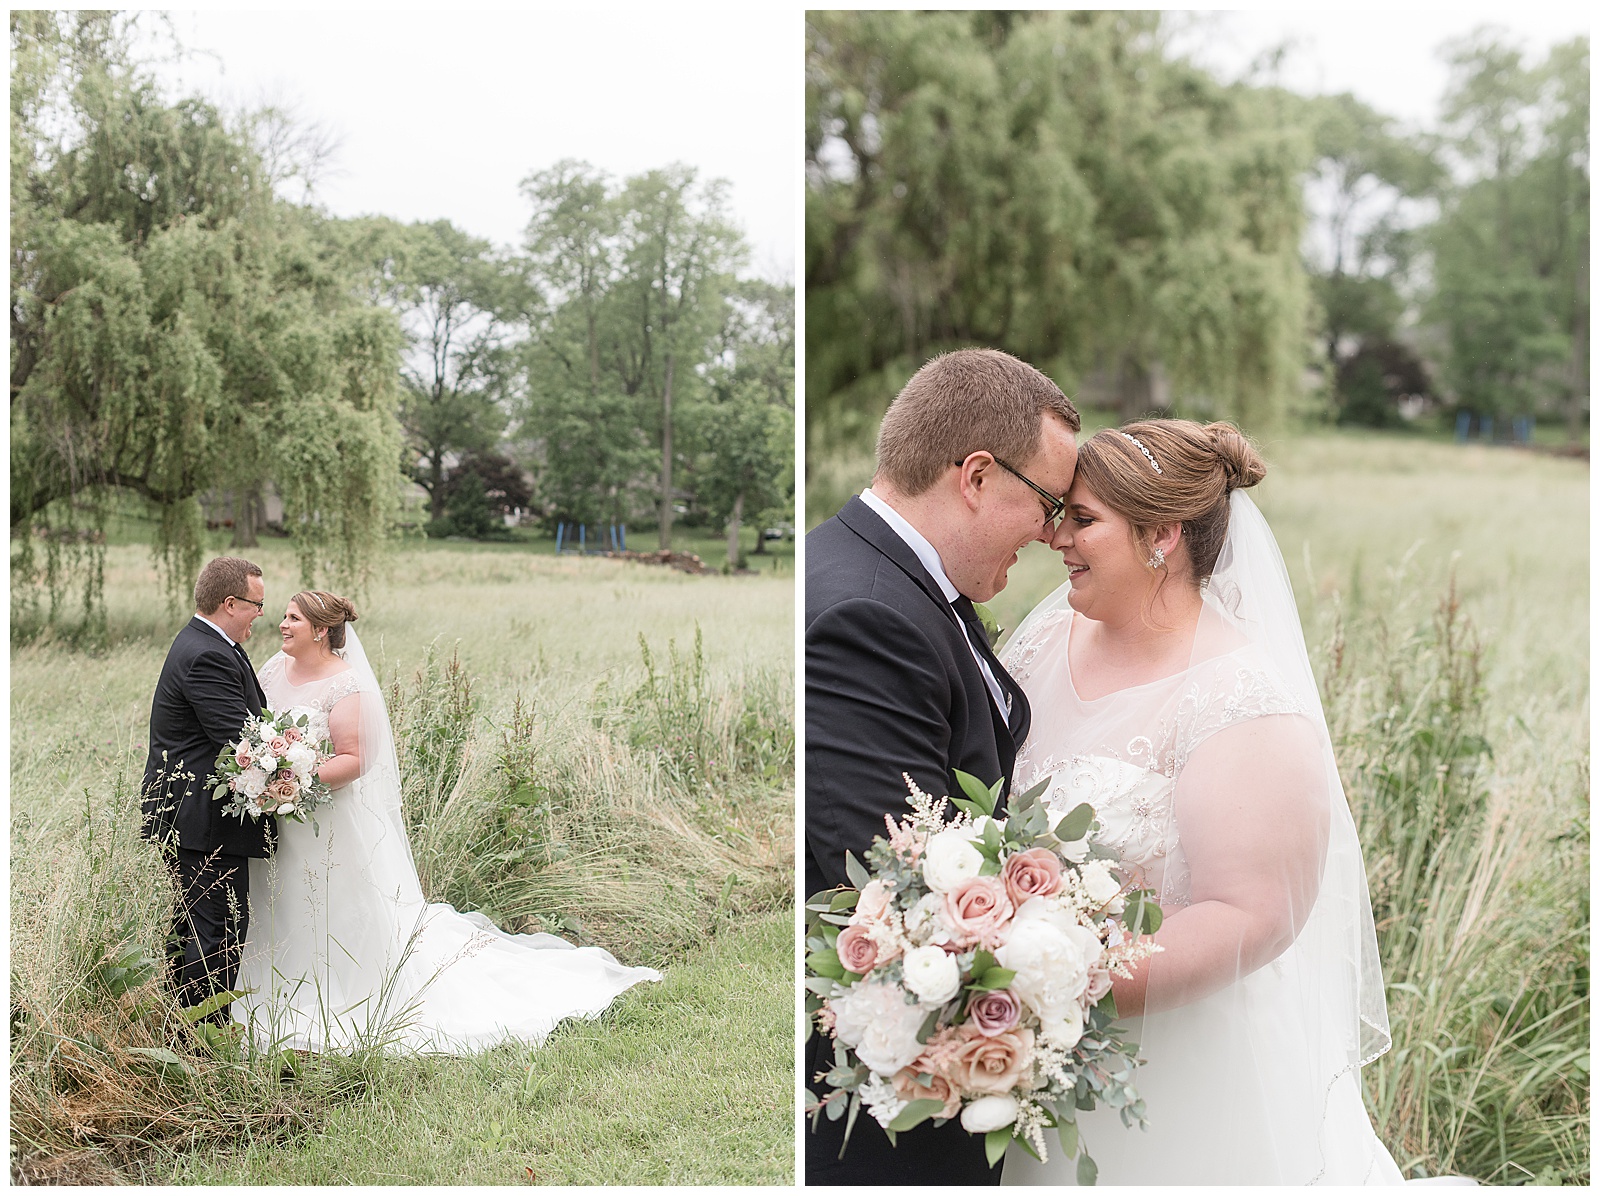 bride and groom standing close resting foreheads together smiling as bride holds bouquet in left hand near willow tree